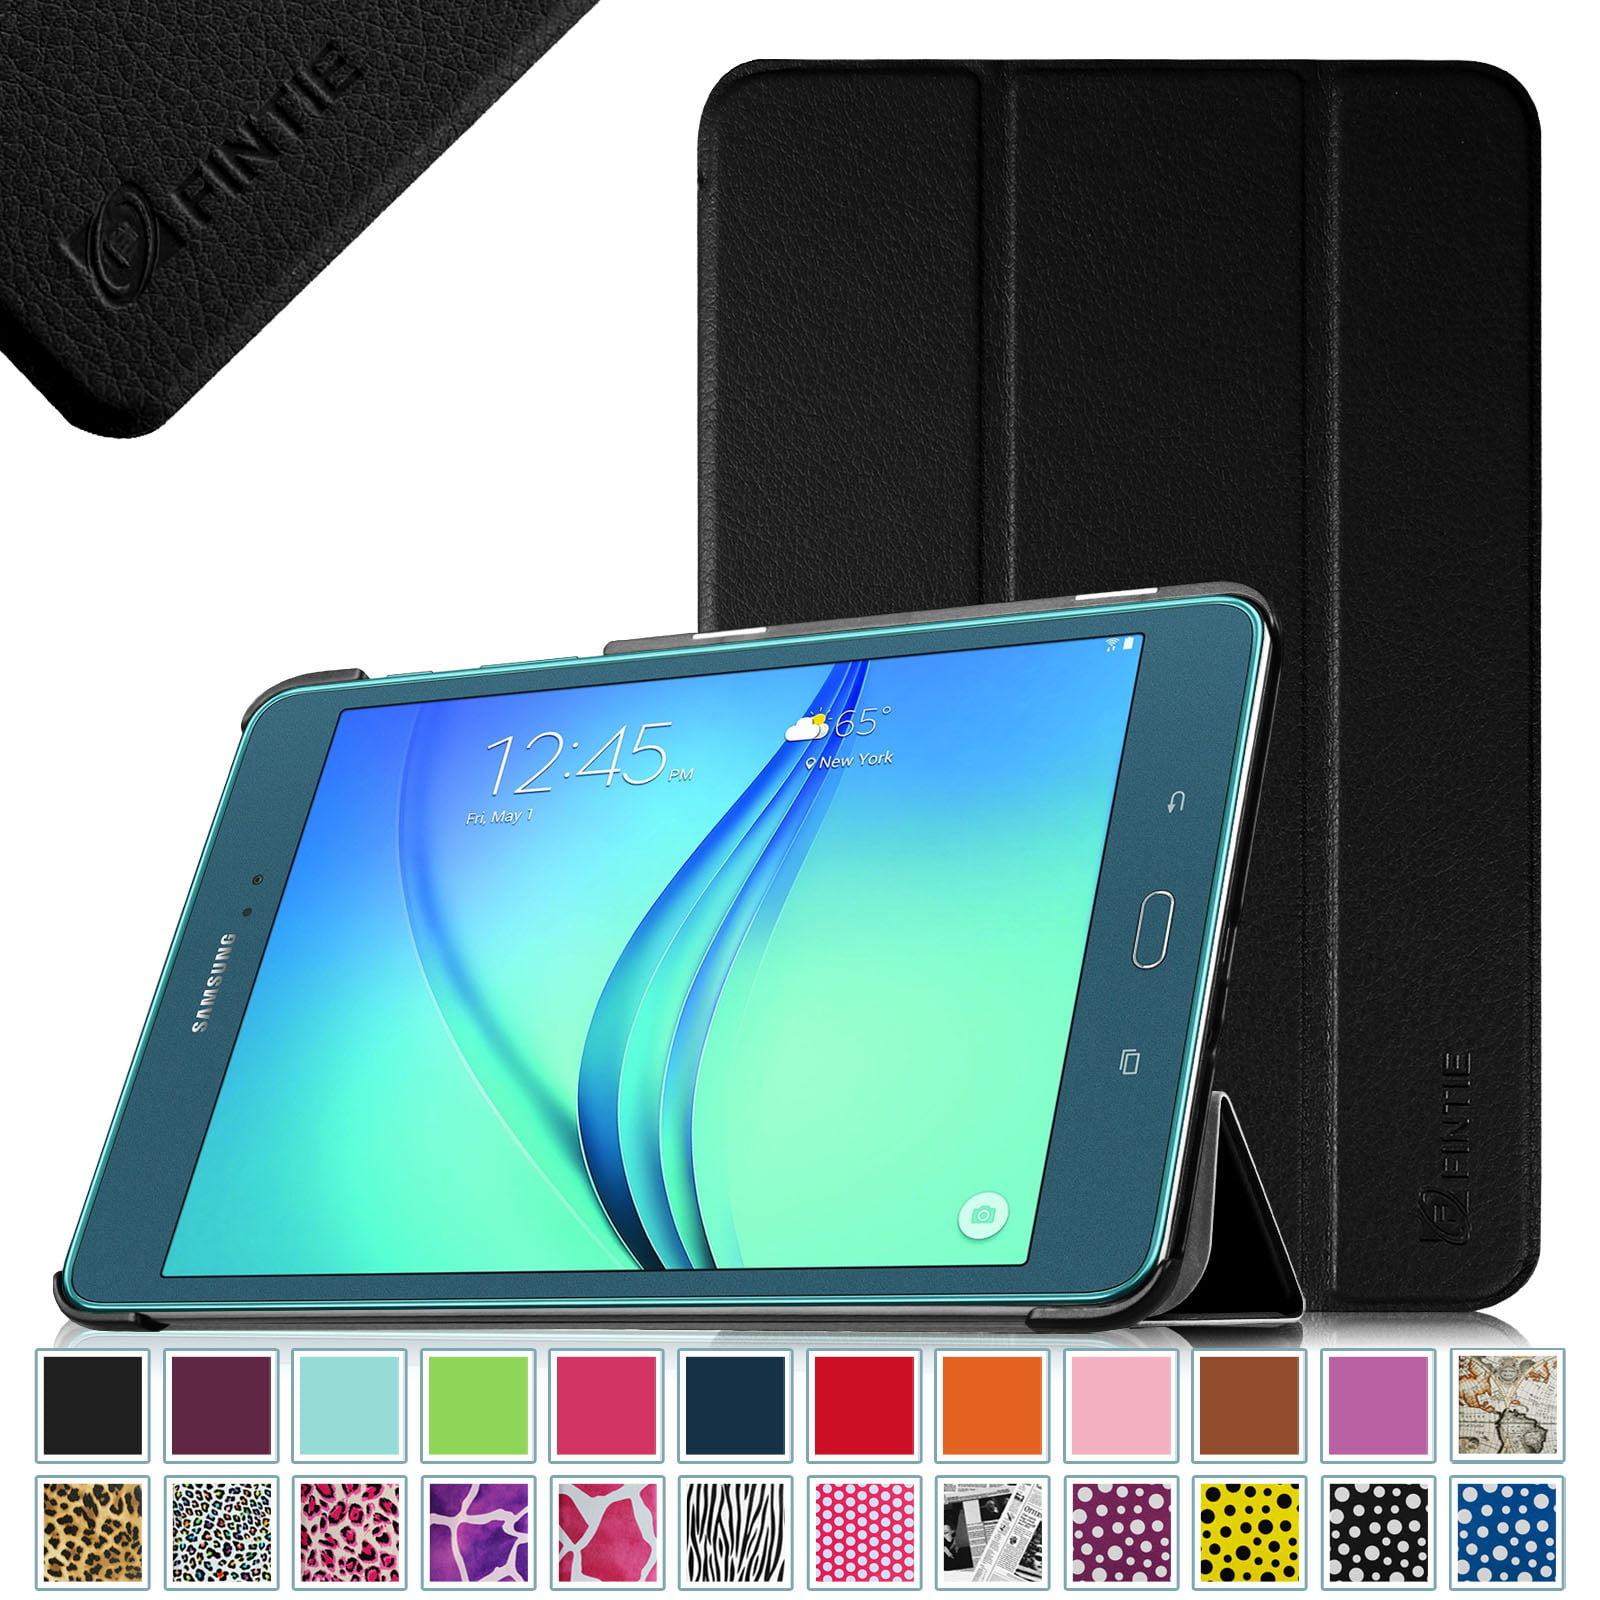 Samsung Galaxy Tab A 8.0 Case Fintie Ultra Slim Stand Cover with Auto Sleep/Wake for Tab A 8.0